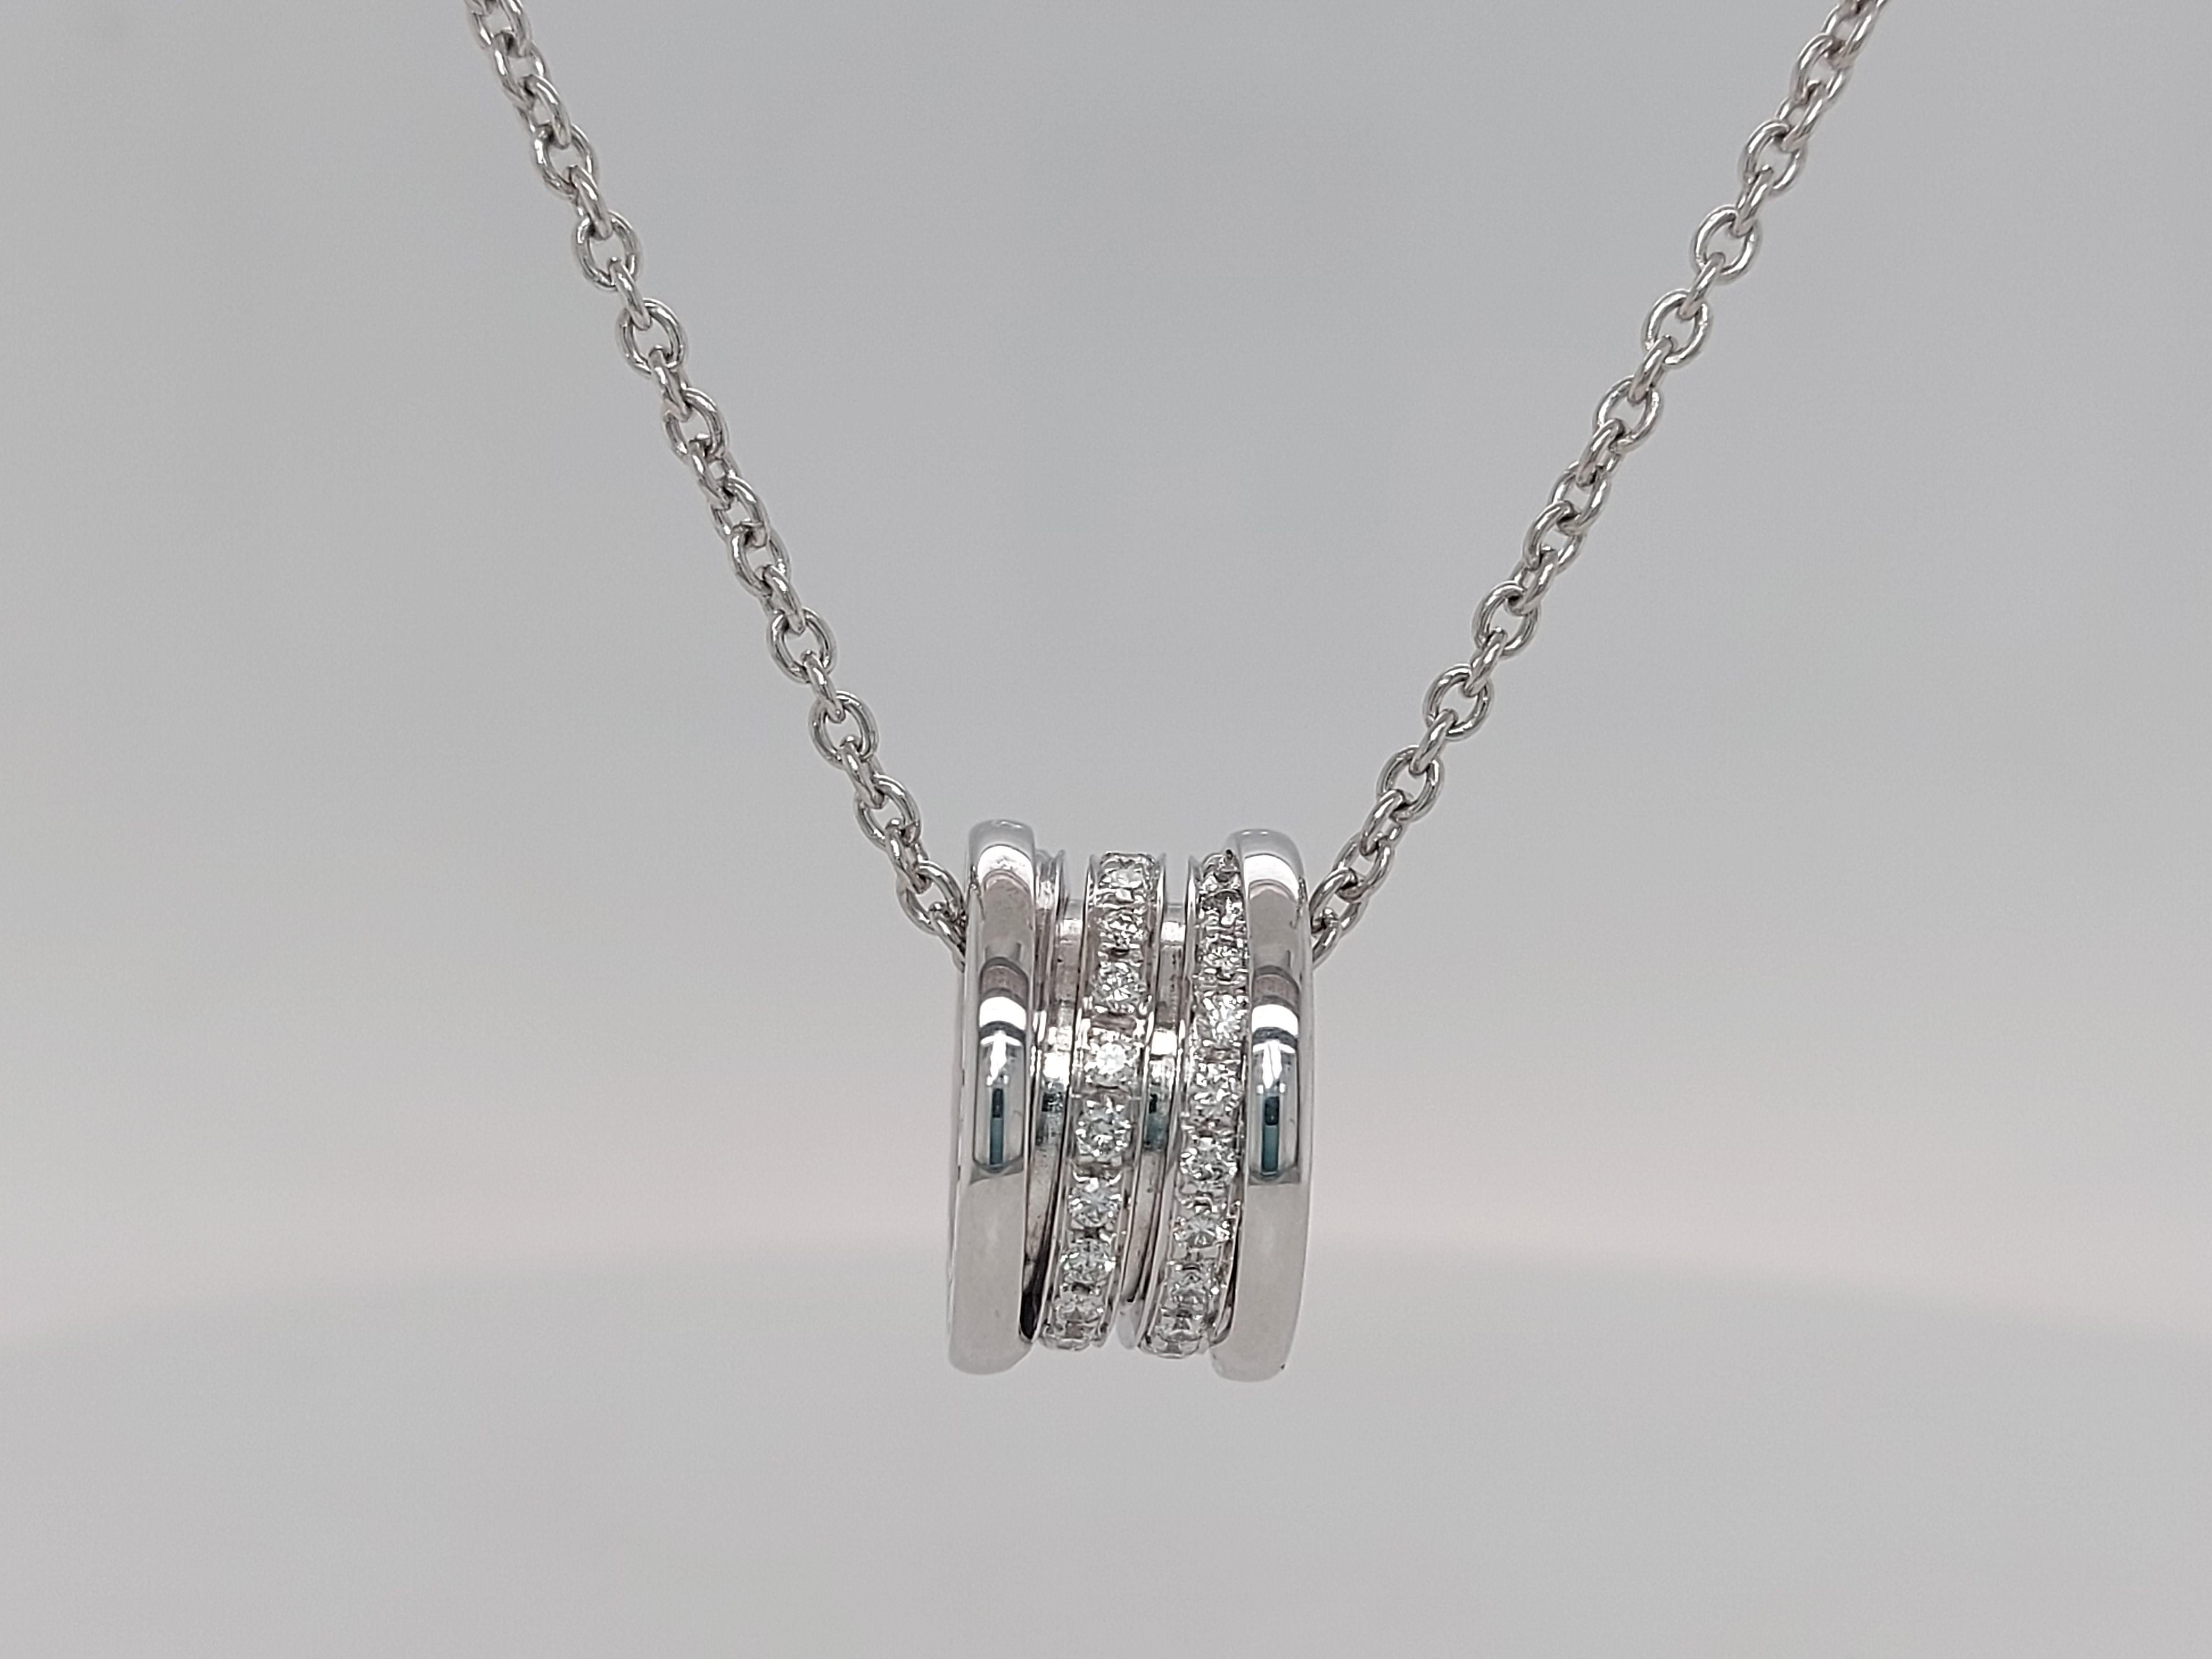 18Kt White Gold Bvlgari B-zero1 Necklace With Pave Diamonds 

The Bvlgari icon B-ZERO1 series inspired by the world's most famous amphitheater Colosseum.
This is a luxury model that combines white gold and diamonds.
The elegant radiance shines on